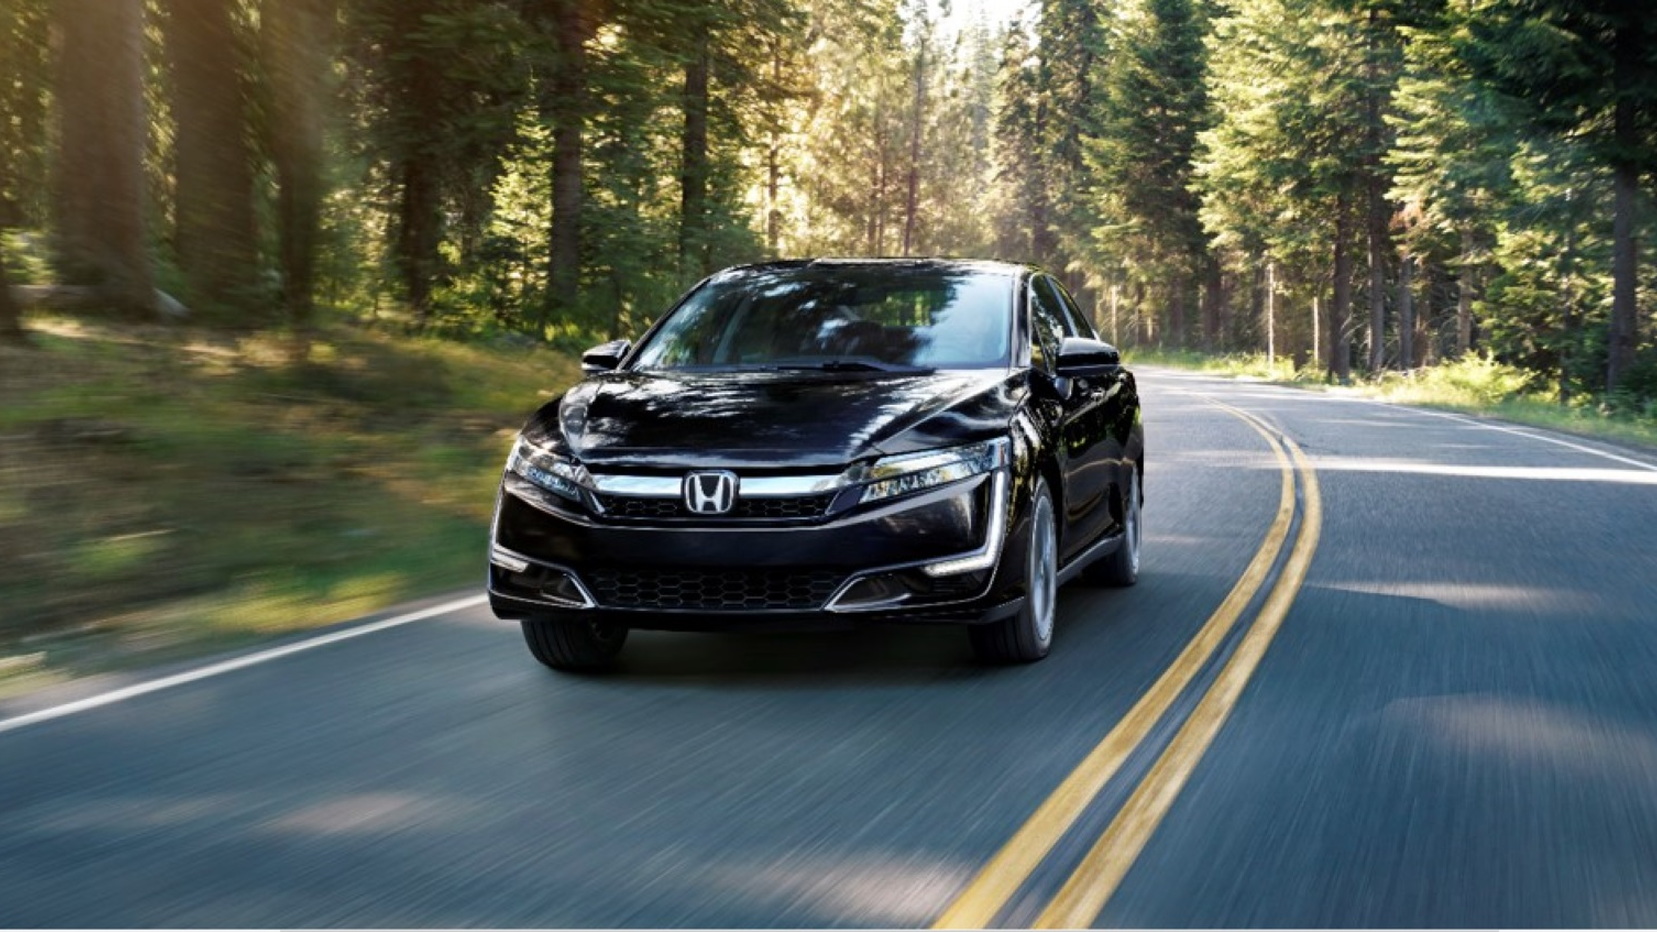 18 Honda Clarity Plug In Hybrid Rated At 47 Miles Of Range